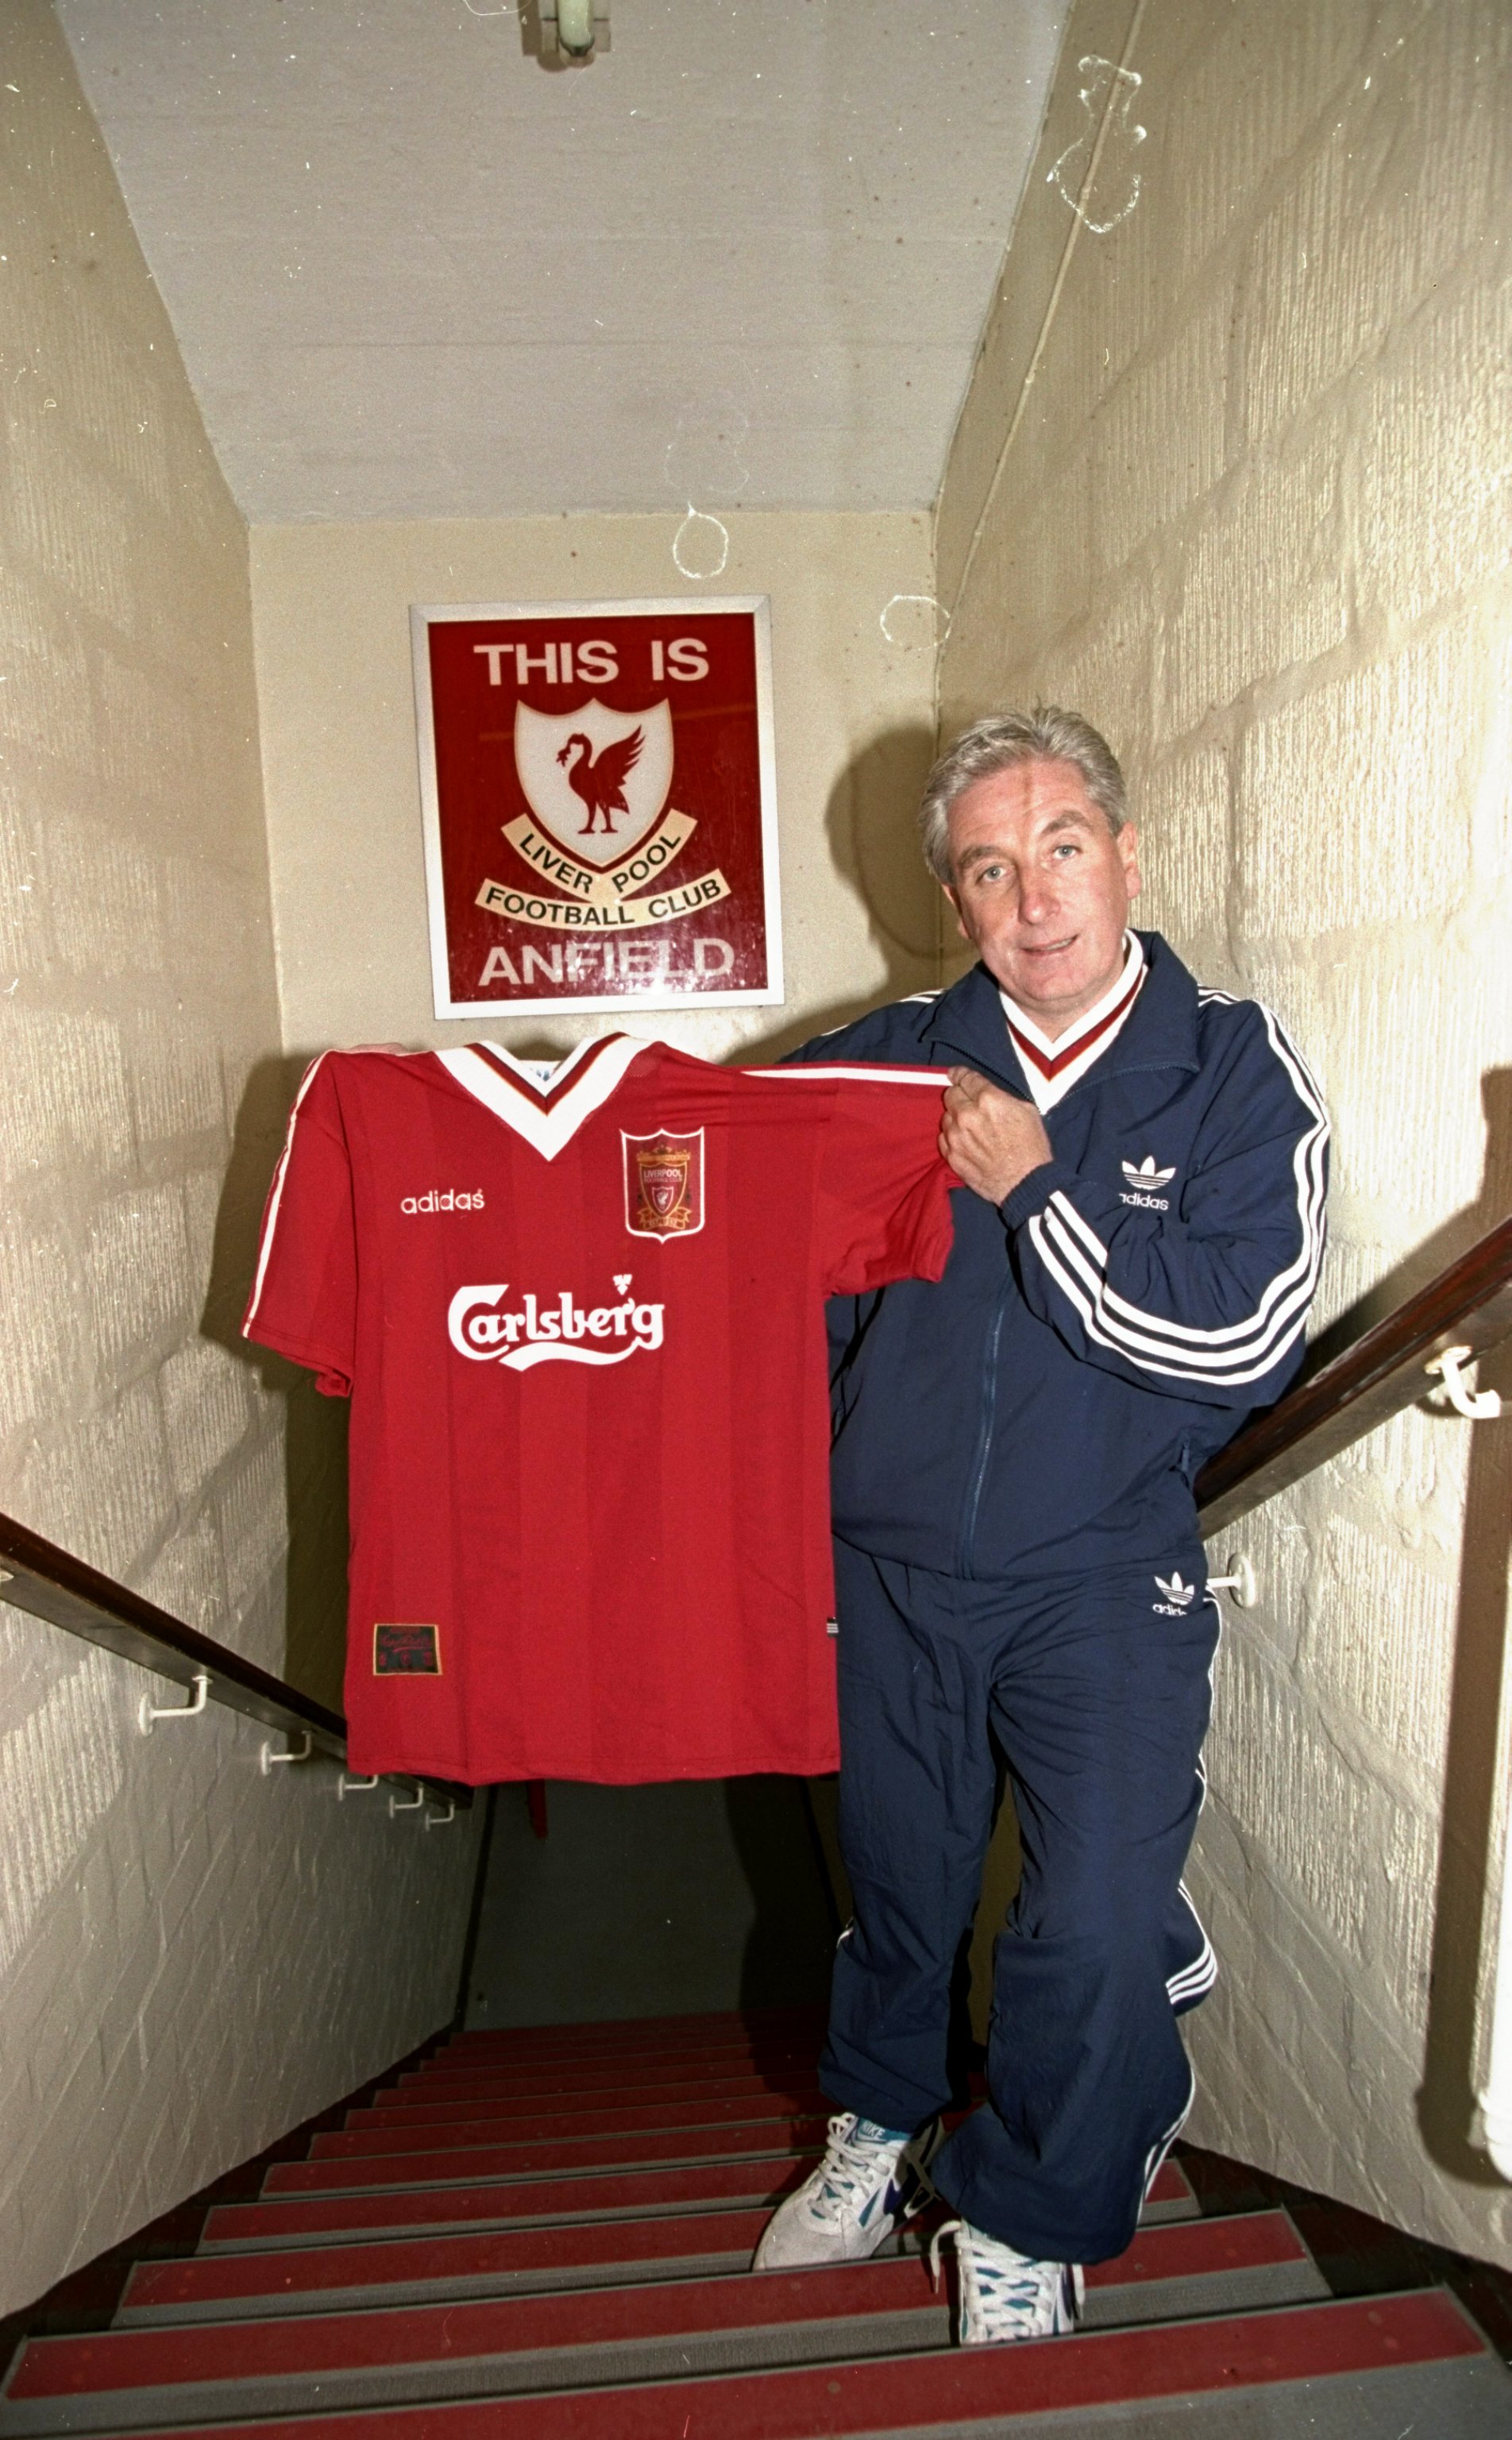 1994:  Liverpool Manager Roy Evans shows off the new team strip at Anfield in Liverpool, England. \ Mandatory Credit: Allsport UK /Allsport